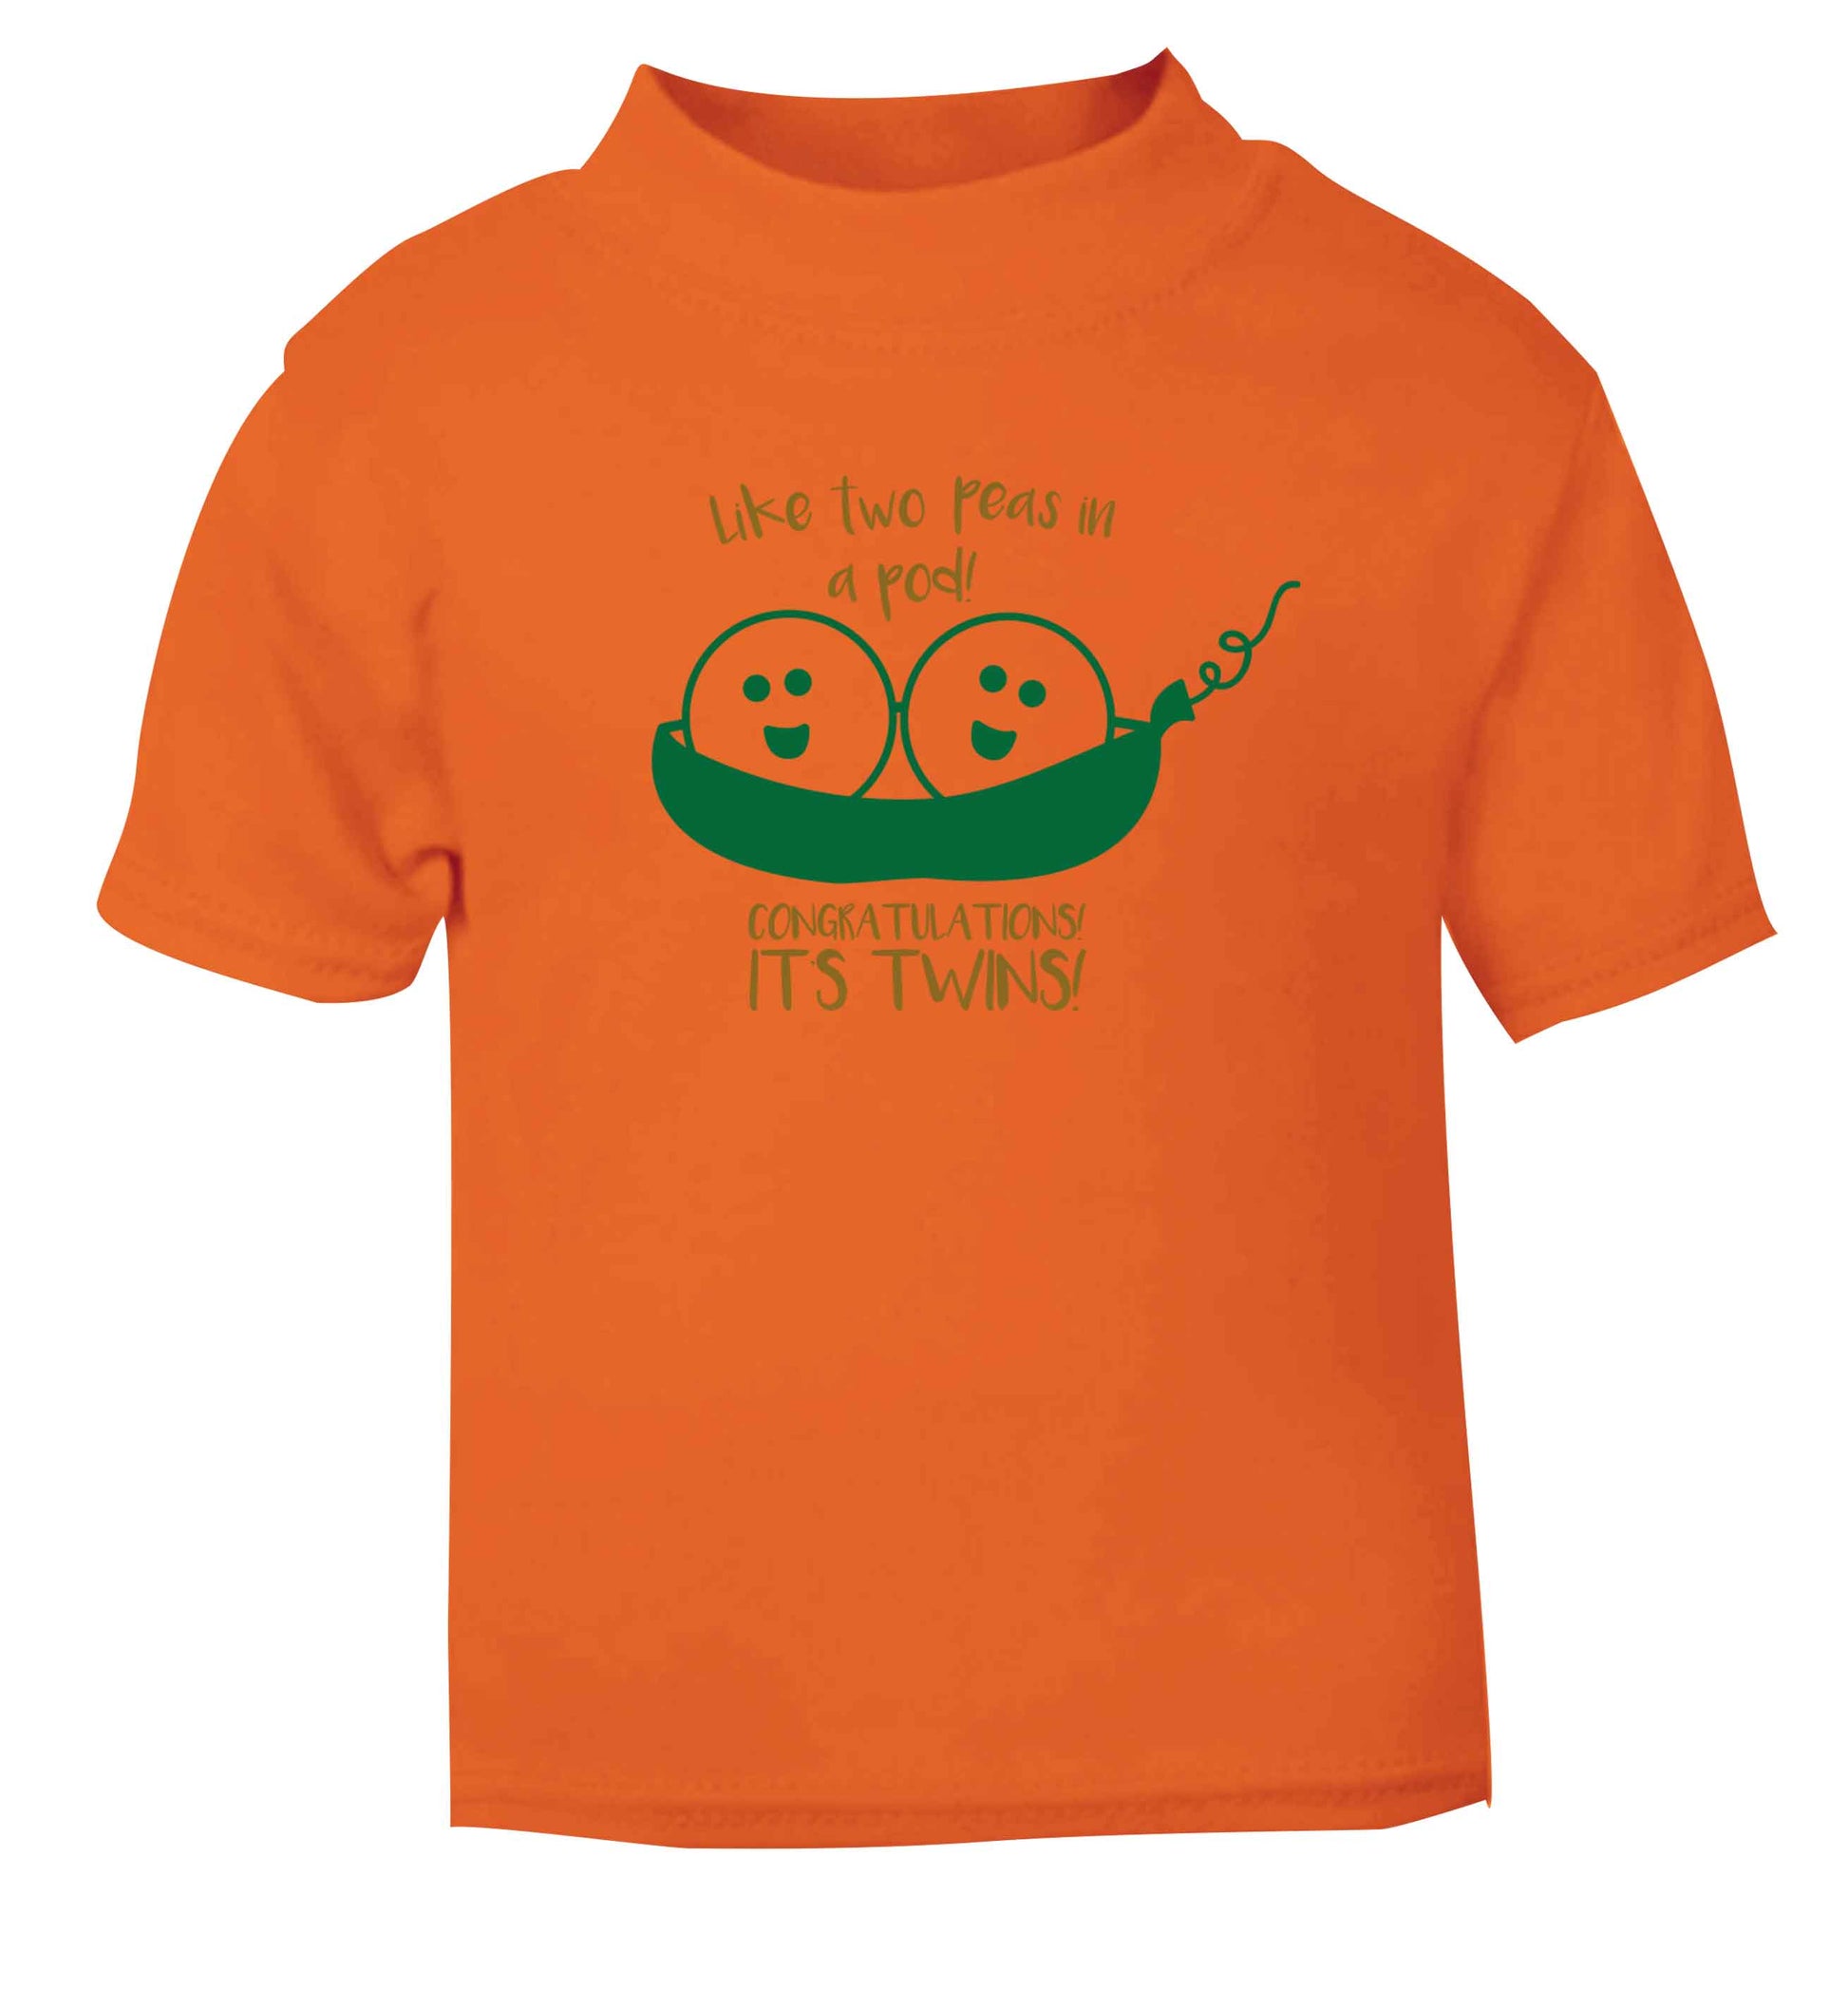 Like two peas in a pod! Congratulations it's twins! orange baby toddler Tshirt 2 Years